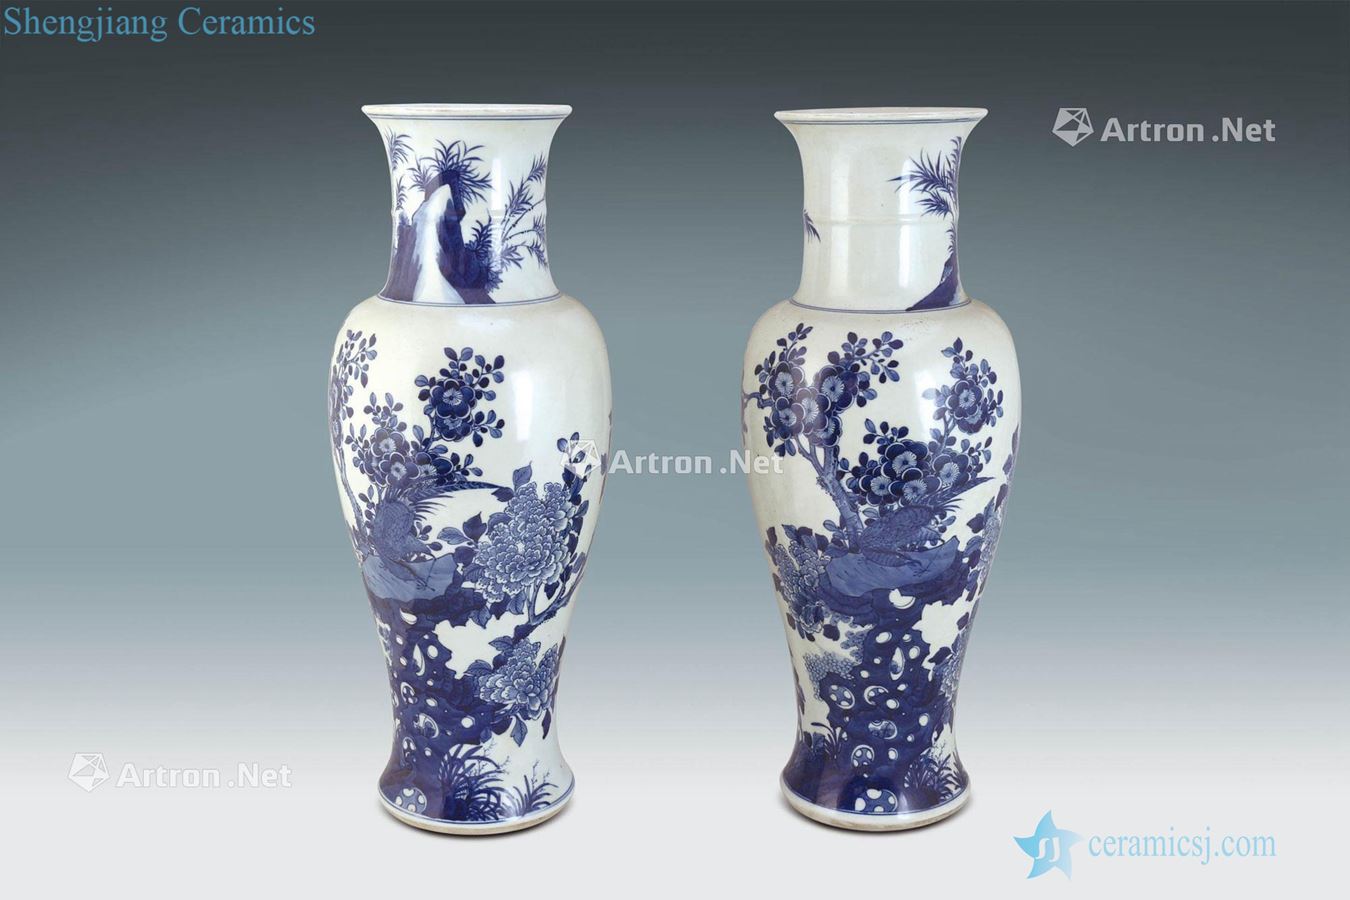 Qing dynasty blue and white flower grain bottle (a)